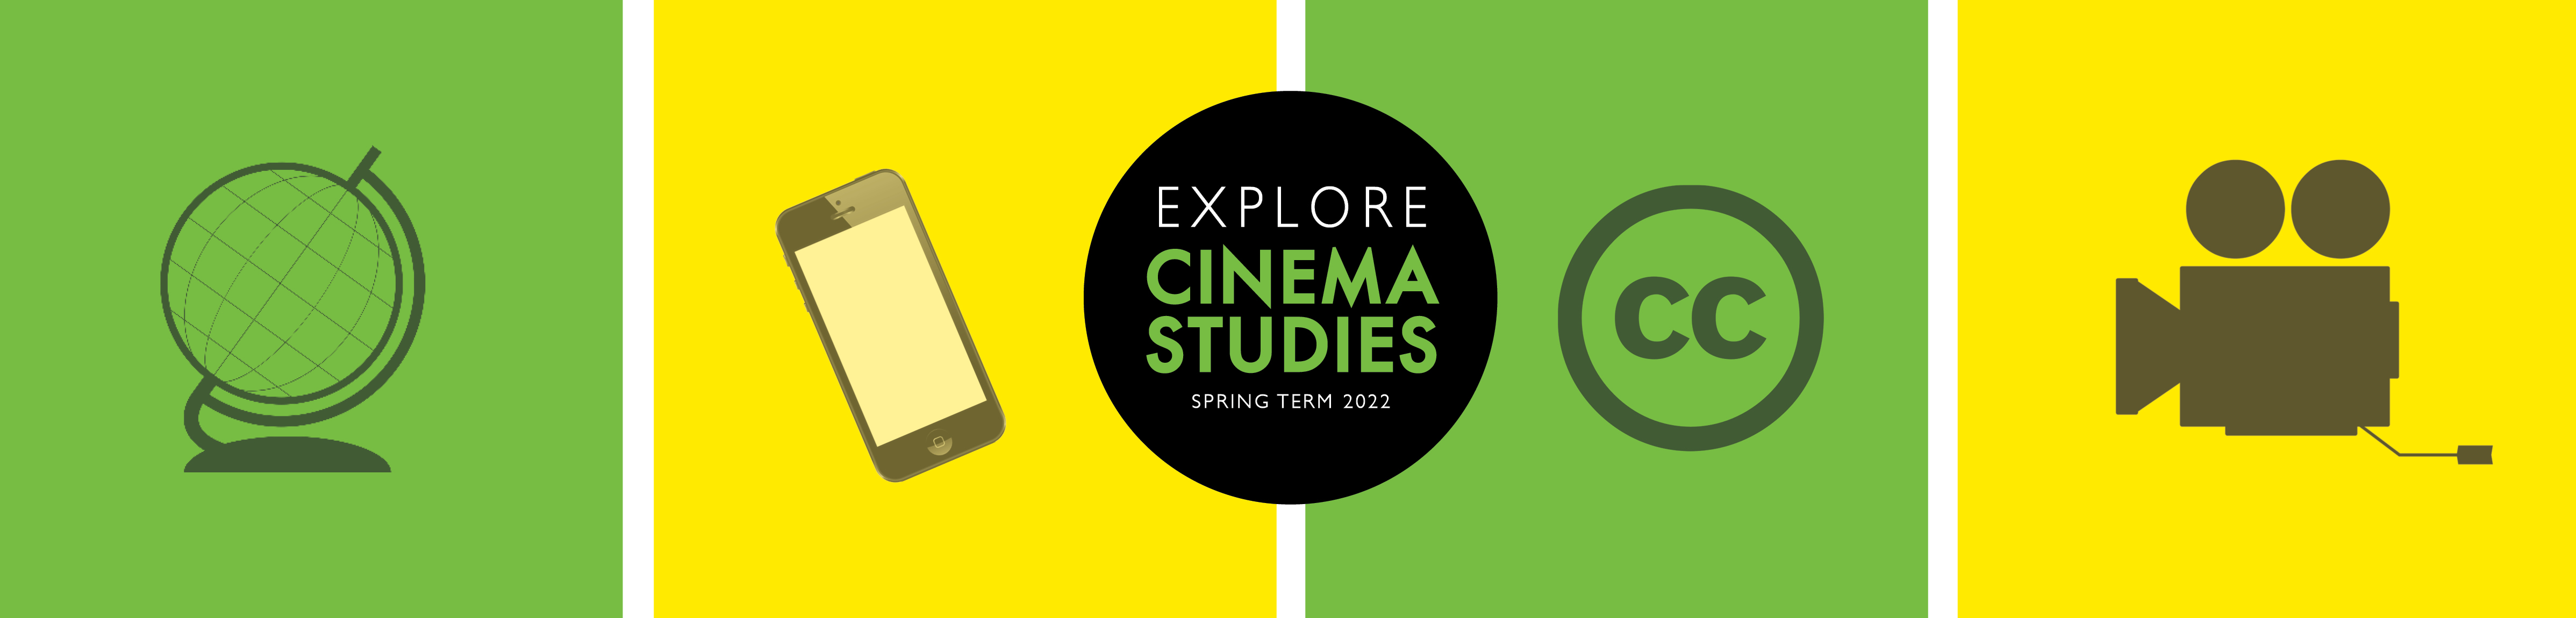 Explore Cinema Studies Spring 2022 Core Ed Courses. Illustrations of a movie camera, globe, Creative Commons logo, and an iPhone